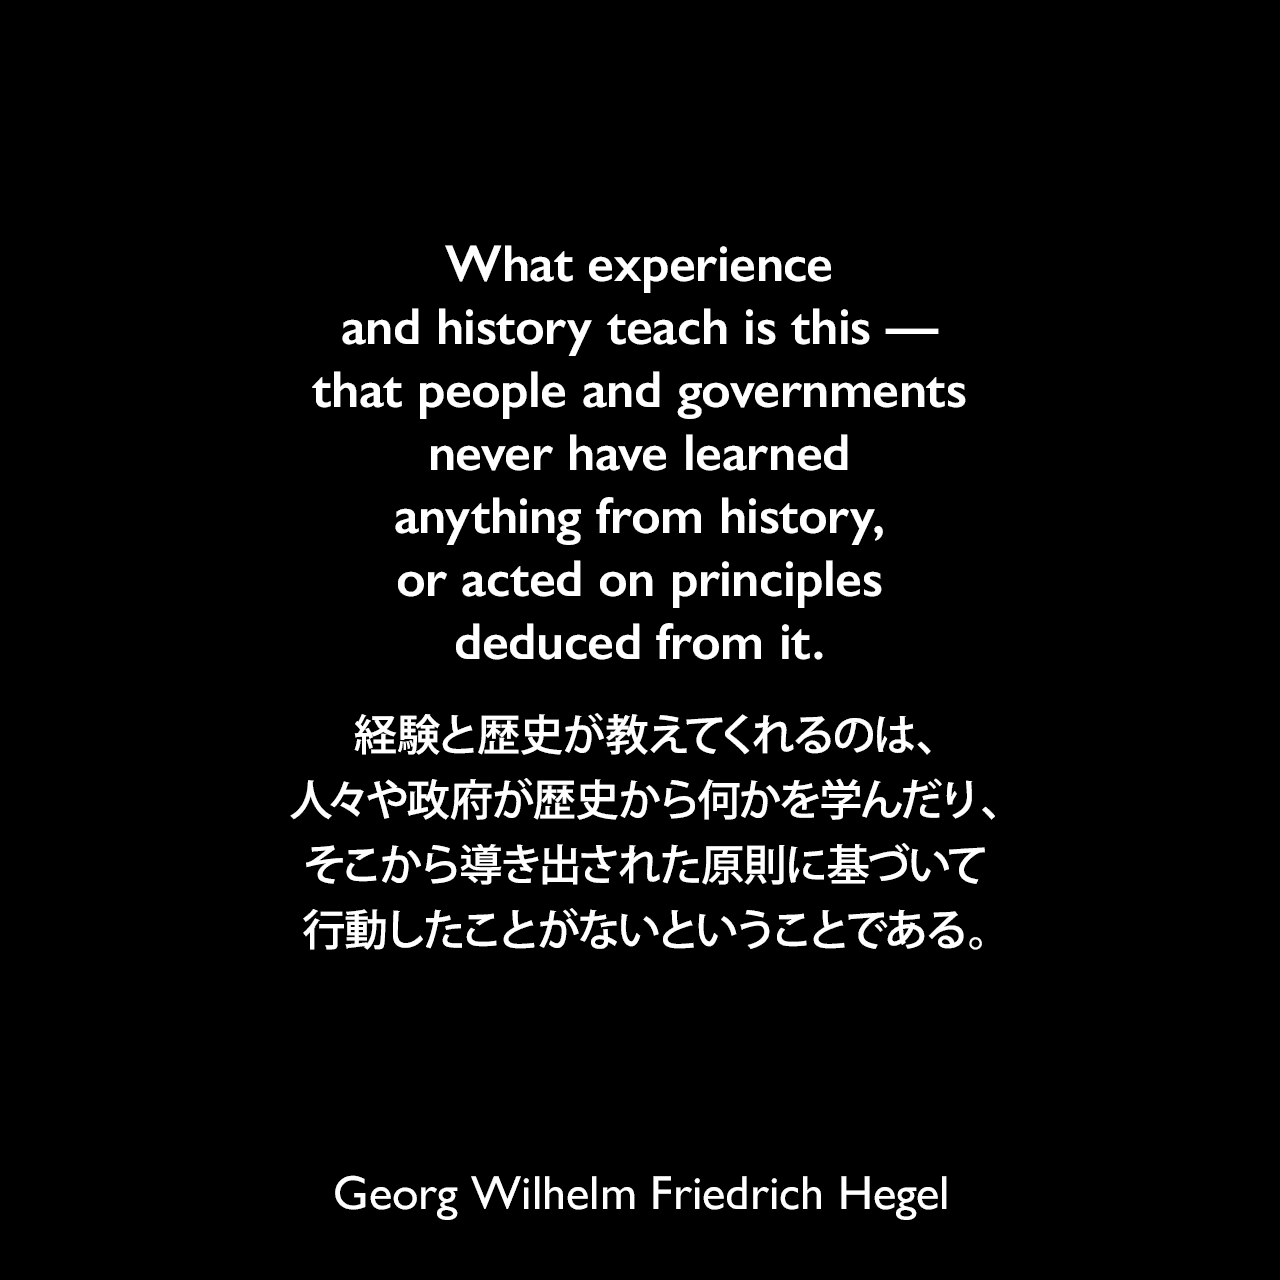 What experience and history teach is this — that people and governments never have learned anything from history, or acted on principles deduced from it.経験と歴史が教えてくれるのは、人々や政府が歴史から何かを学んだり、そこから導き出された原則に基づいて行動したことがないということである。- ヘーゲルによる本「Lectures on the Philosophy of History」よりGeorg Wilhelm Friedrich Hegel